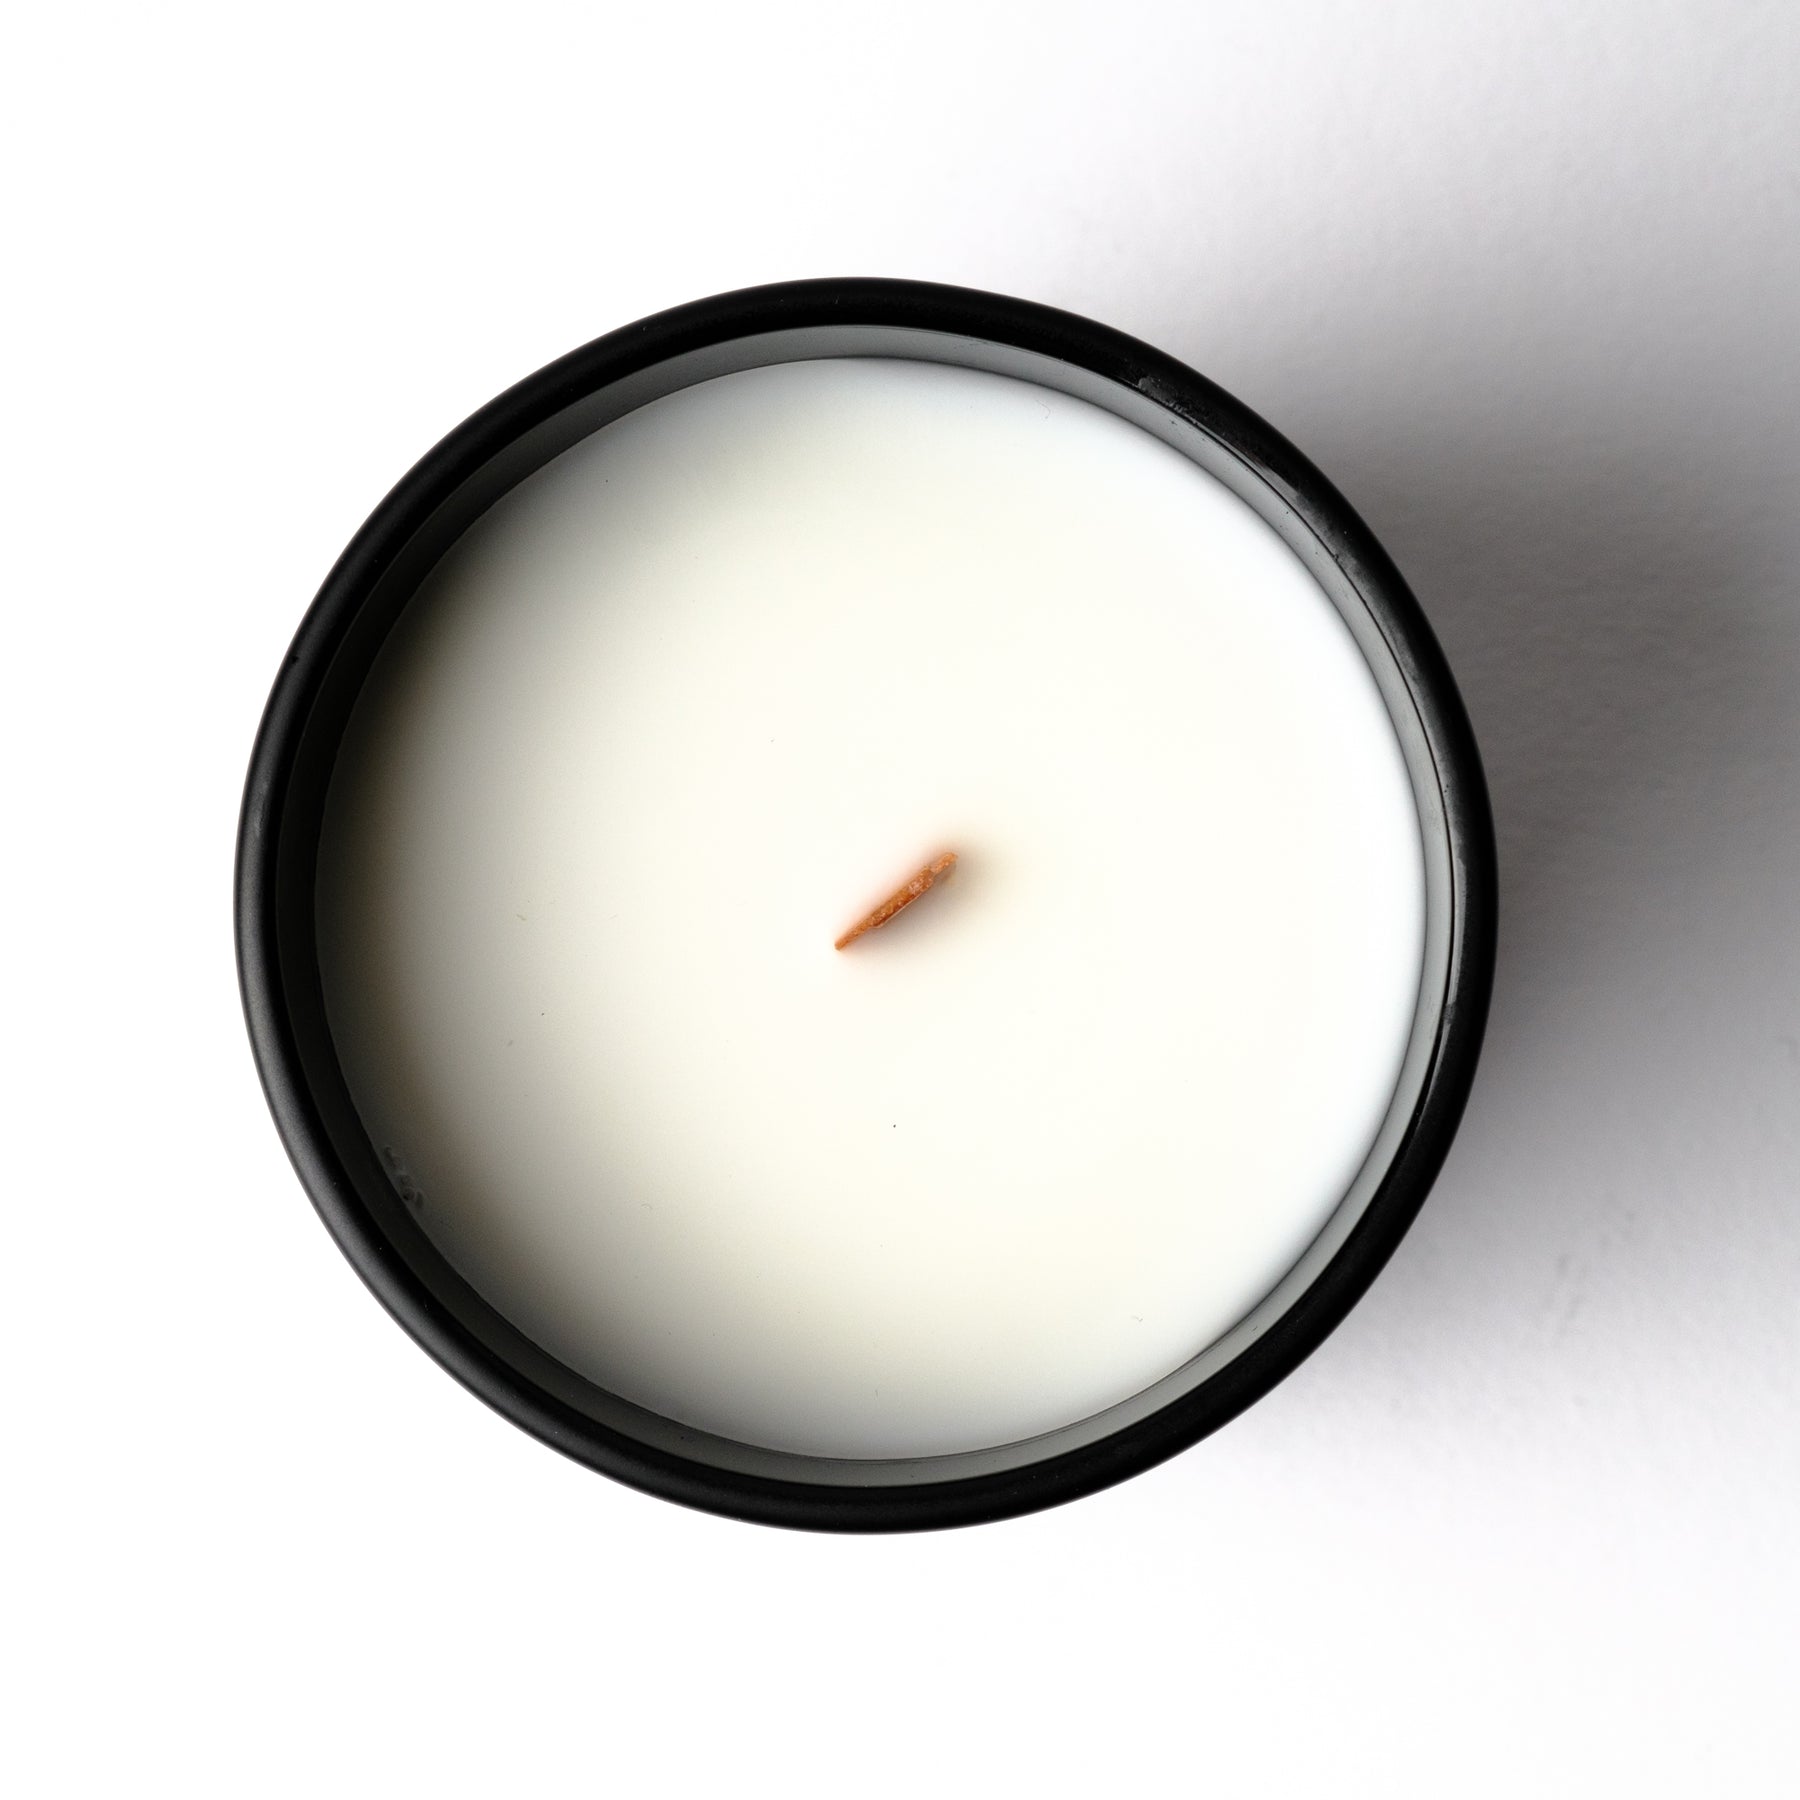 Snake Oil Provisions Sixth Avenue — 7.2 oz Hand Poured Candle